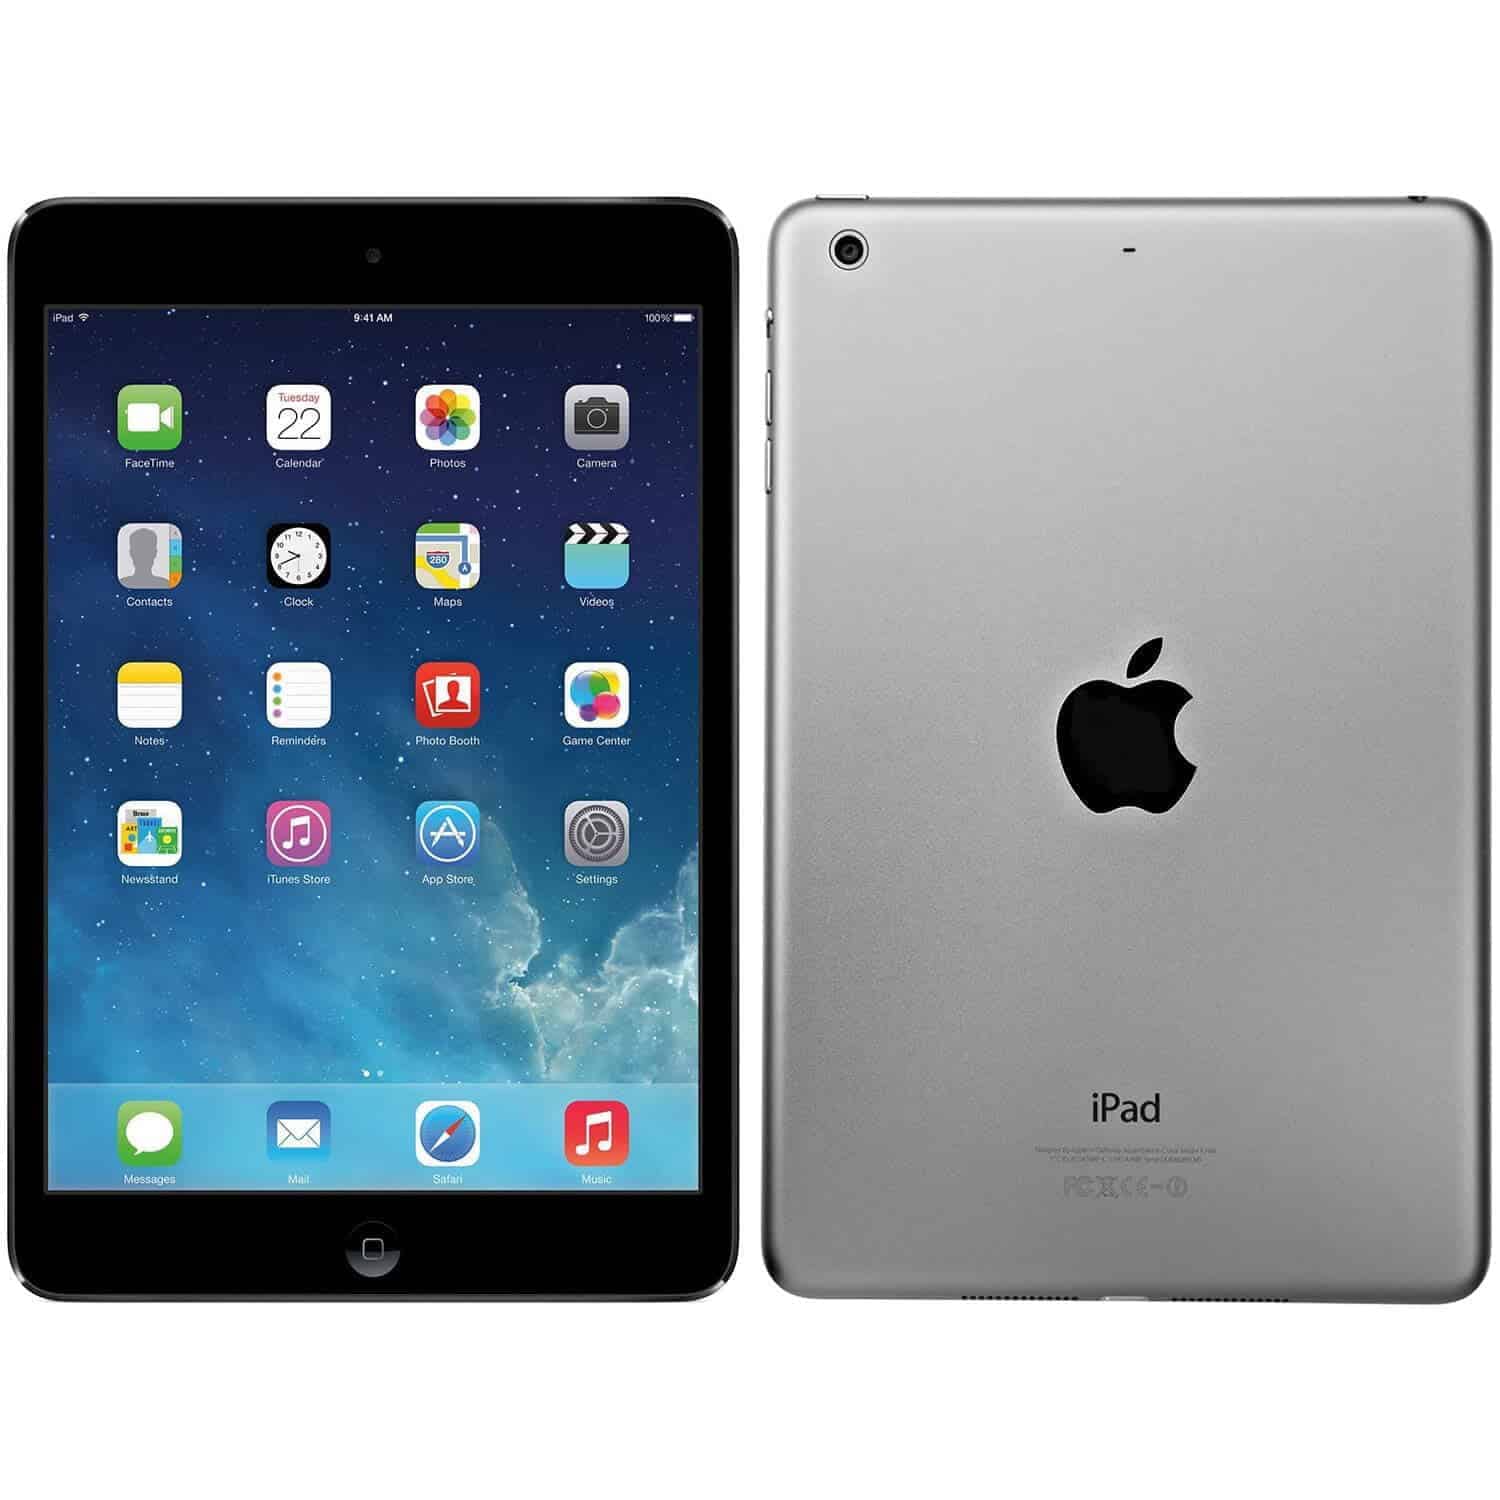 Apple iPad Air 1st Generation Technical Specifications